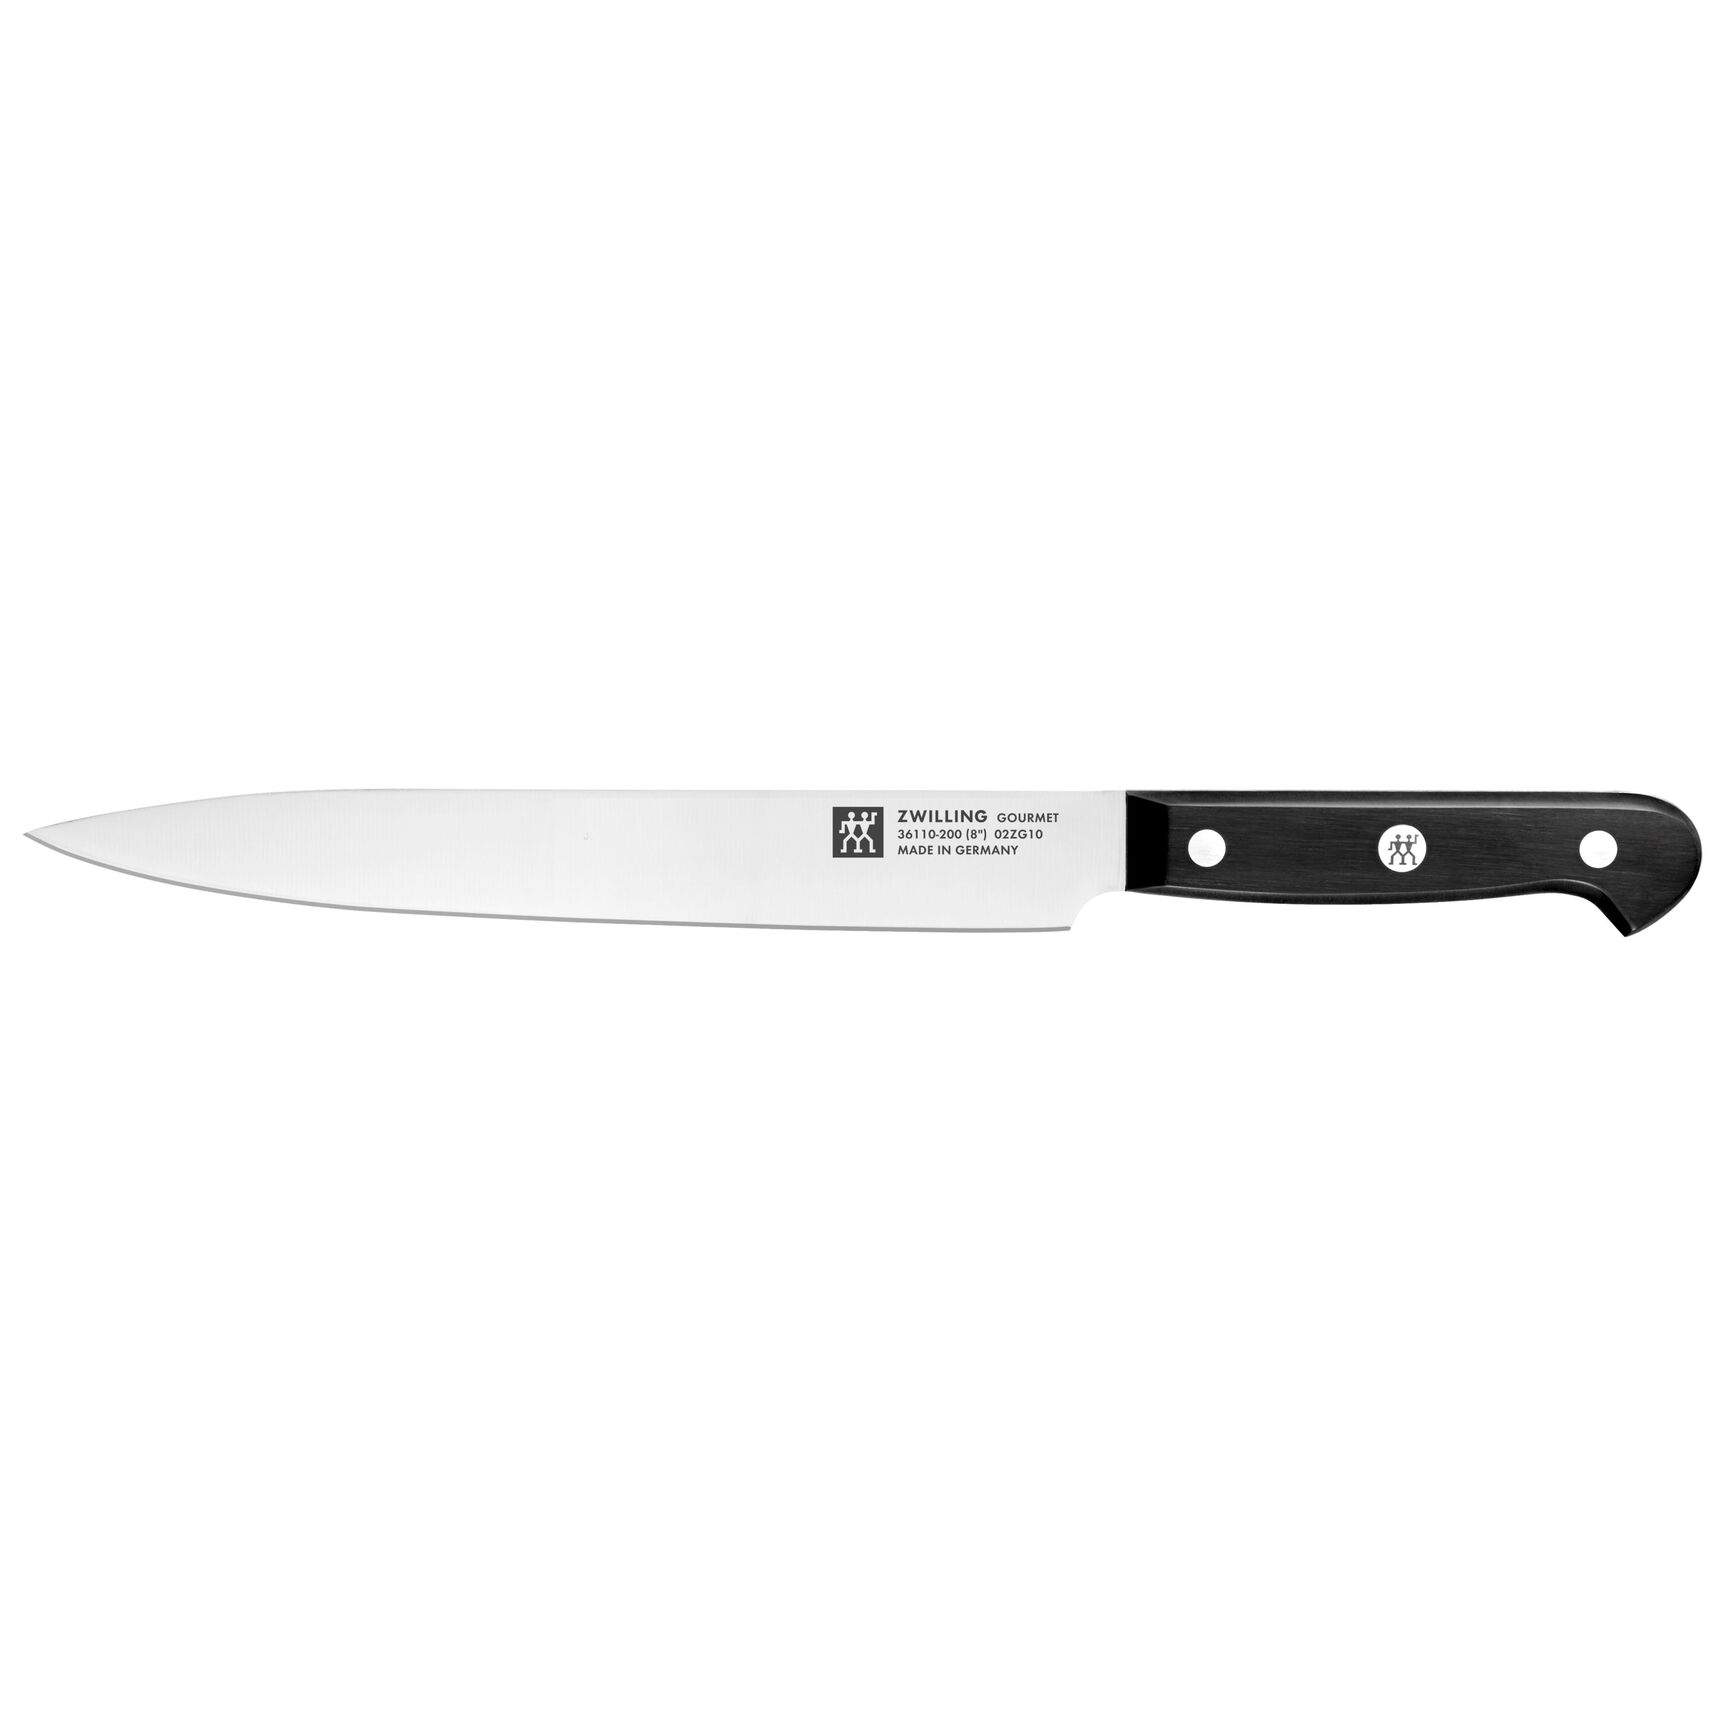 Zwilling Gourmet 20cm Carving Knife